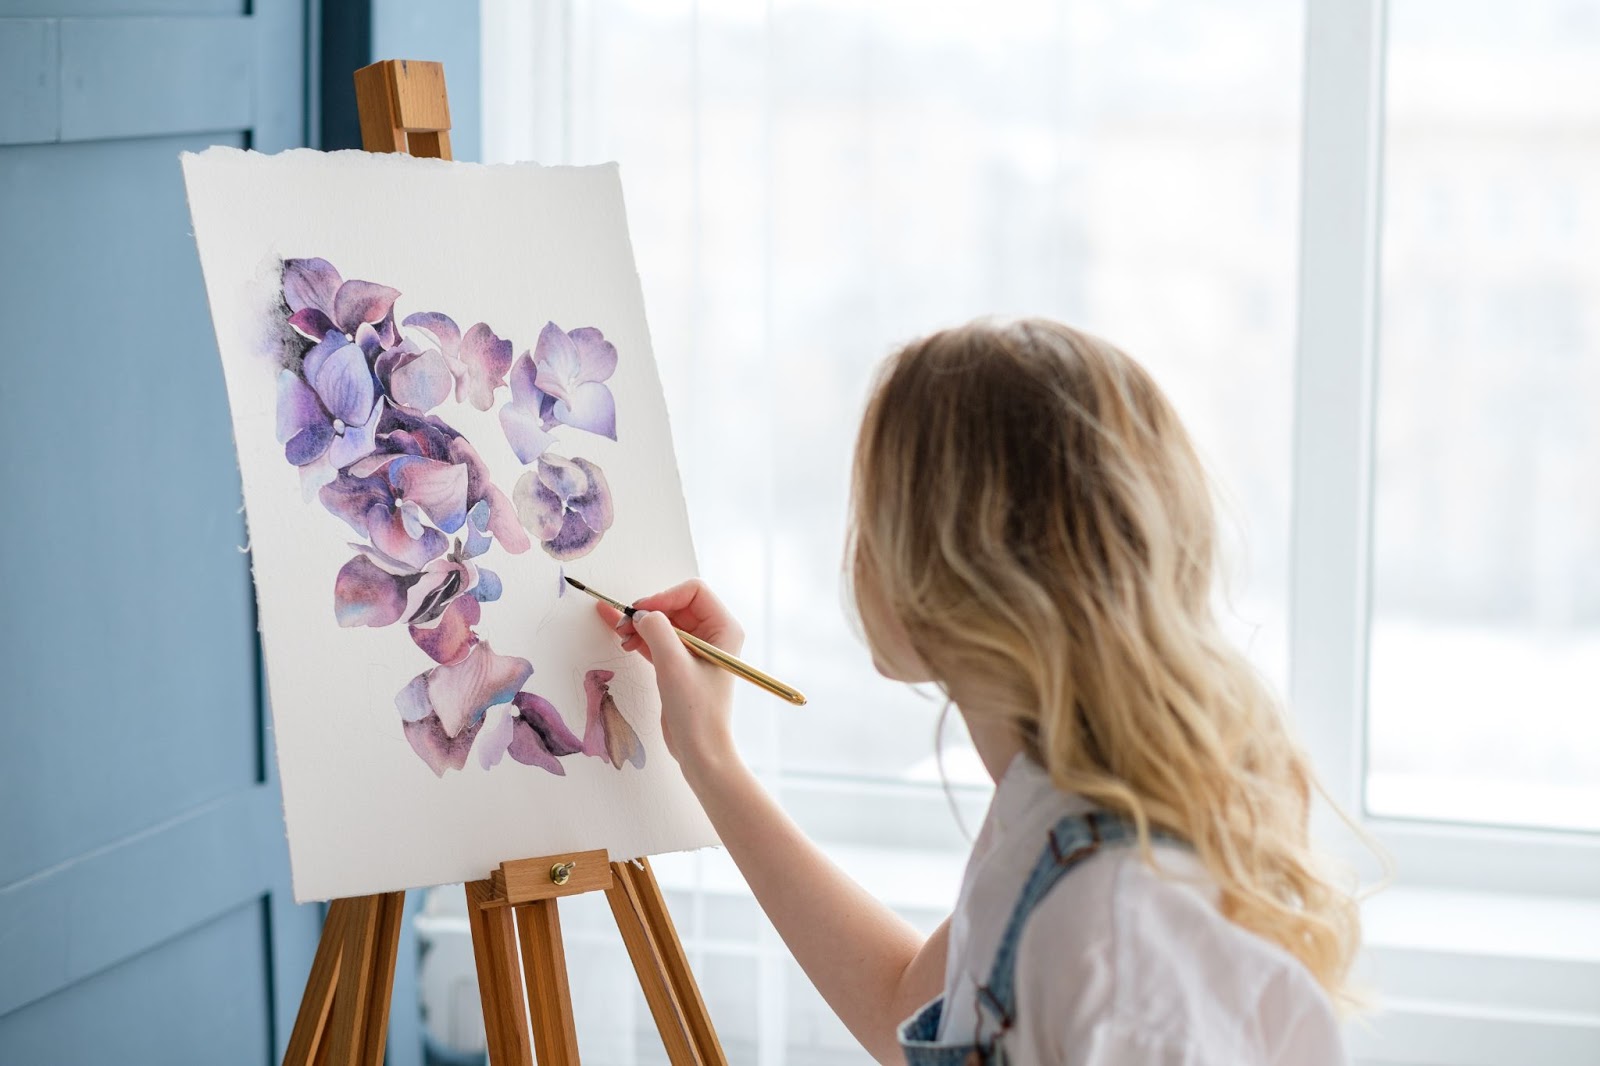 A woman painting purple flowers on a canvas, reflecting topics like co-parenting, divorce, and parenting